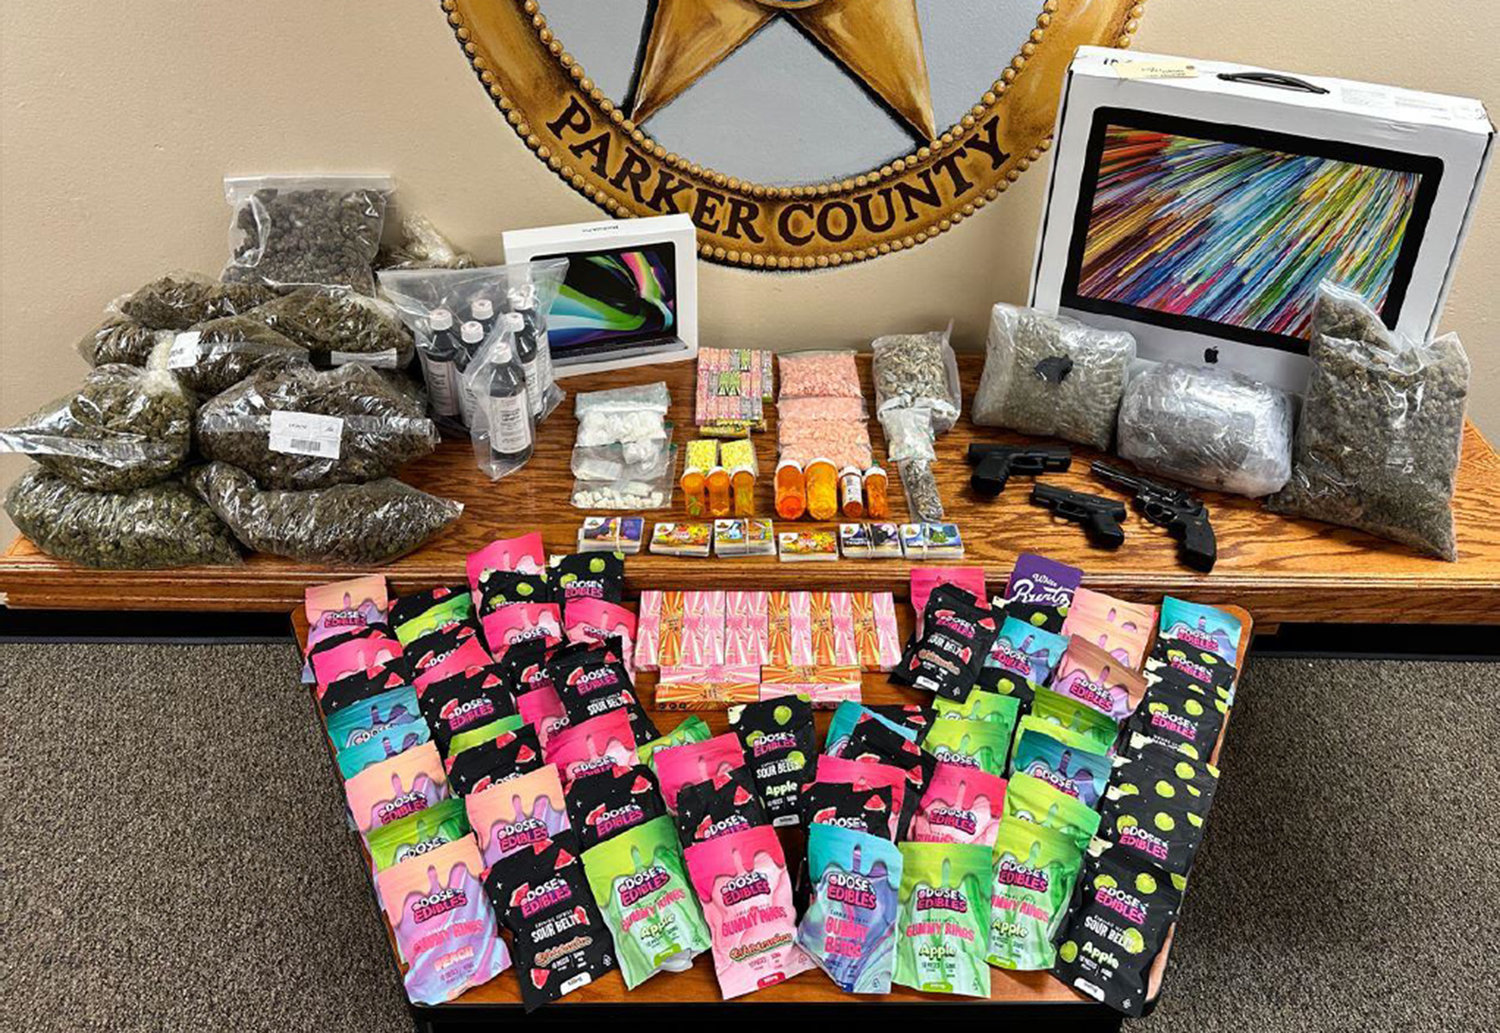 Parker County Special Crimes Unit investigators seized weapons, electronics, and more than $116,000 in illegal narcotics, including suspected methamphetamine, Adderall, cocaine, Alprazolam, Hydrocodone, MDMA, Psilocybin (mushrooms), Promethazine, hydroponic marijuana, and THC cartridges, wax, and edibles from the home of Isaiah Marquis Christopher.